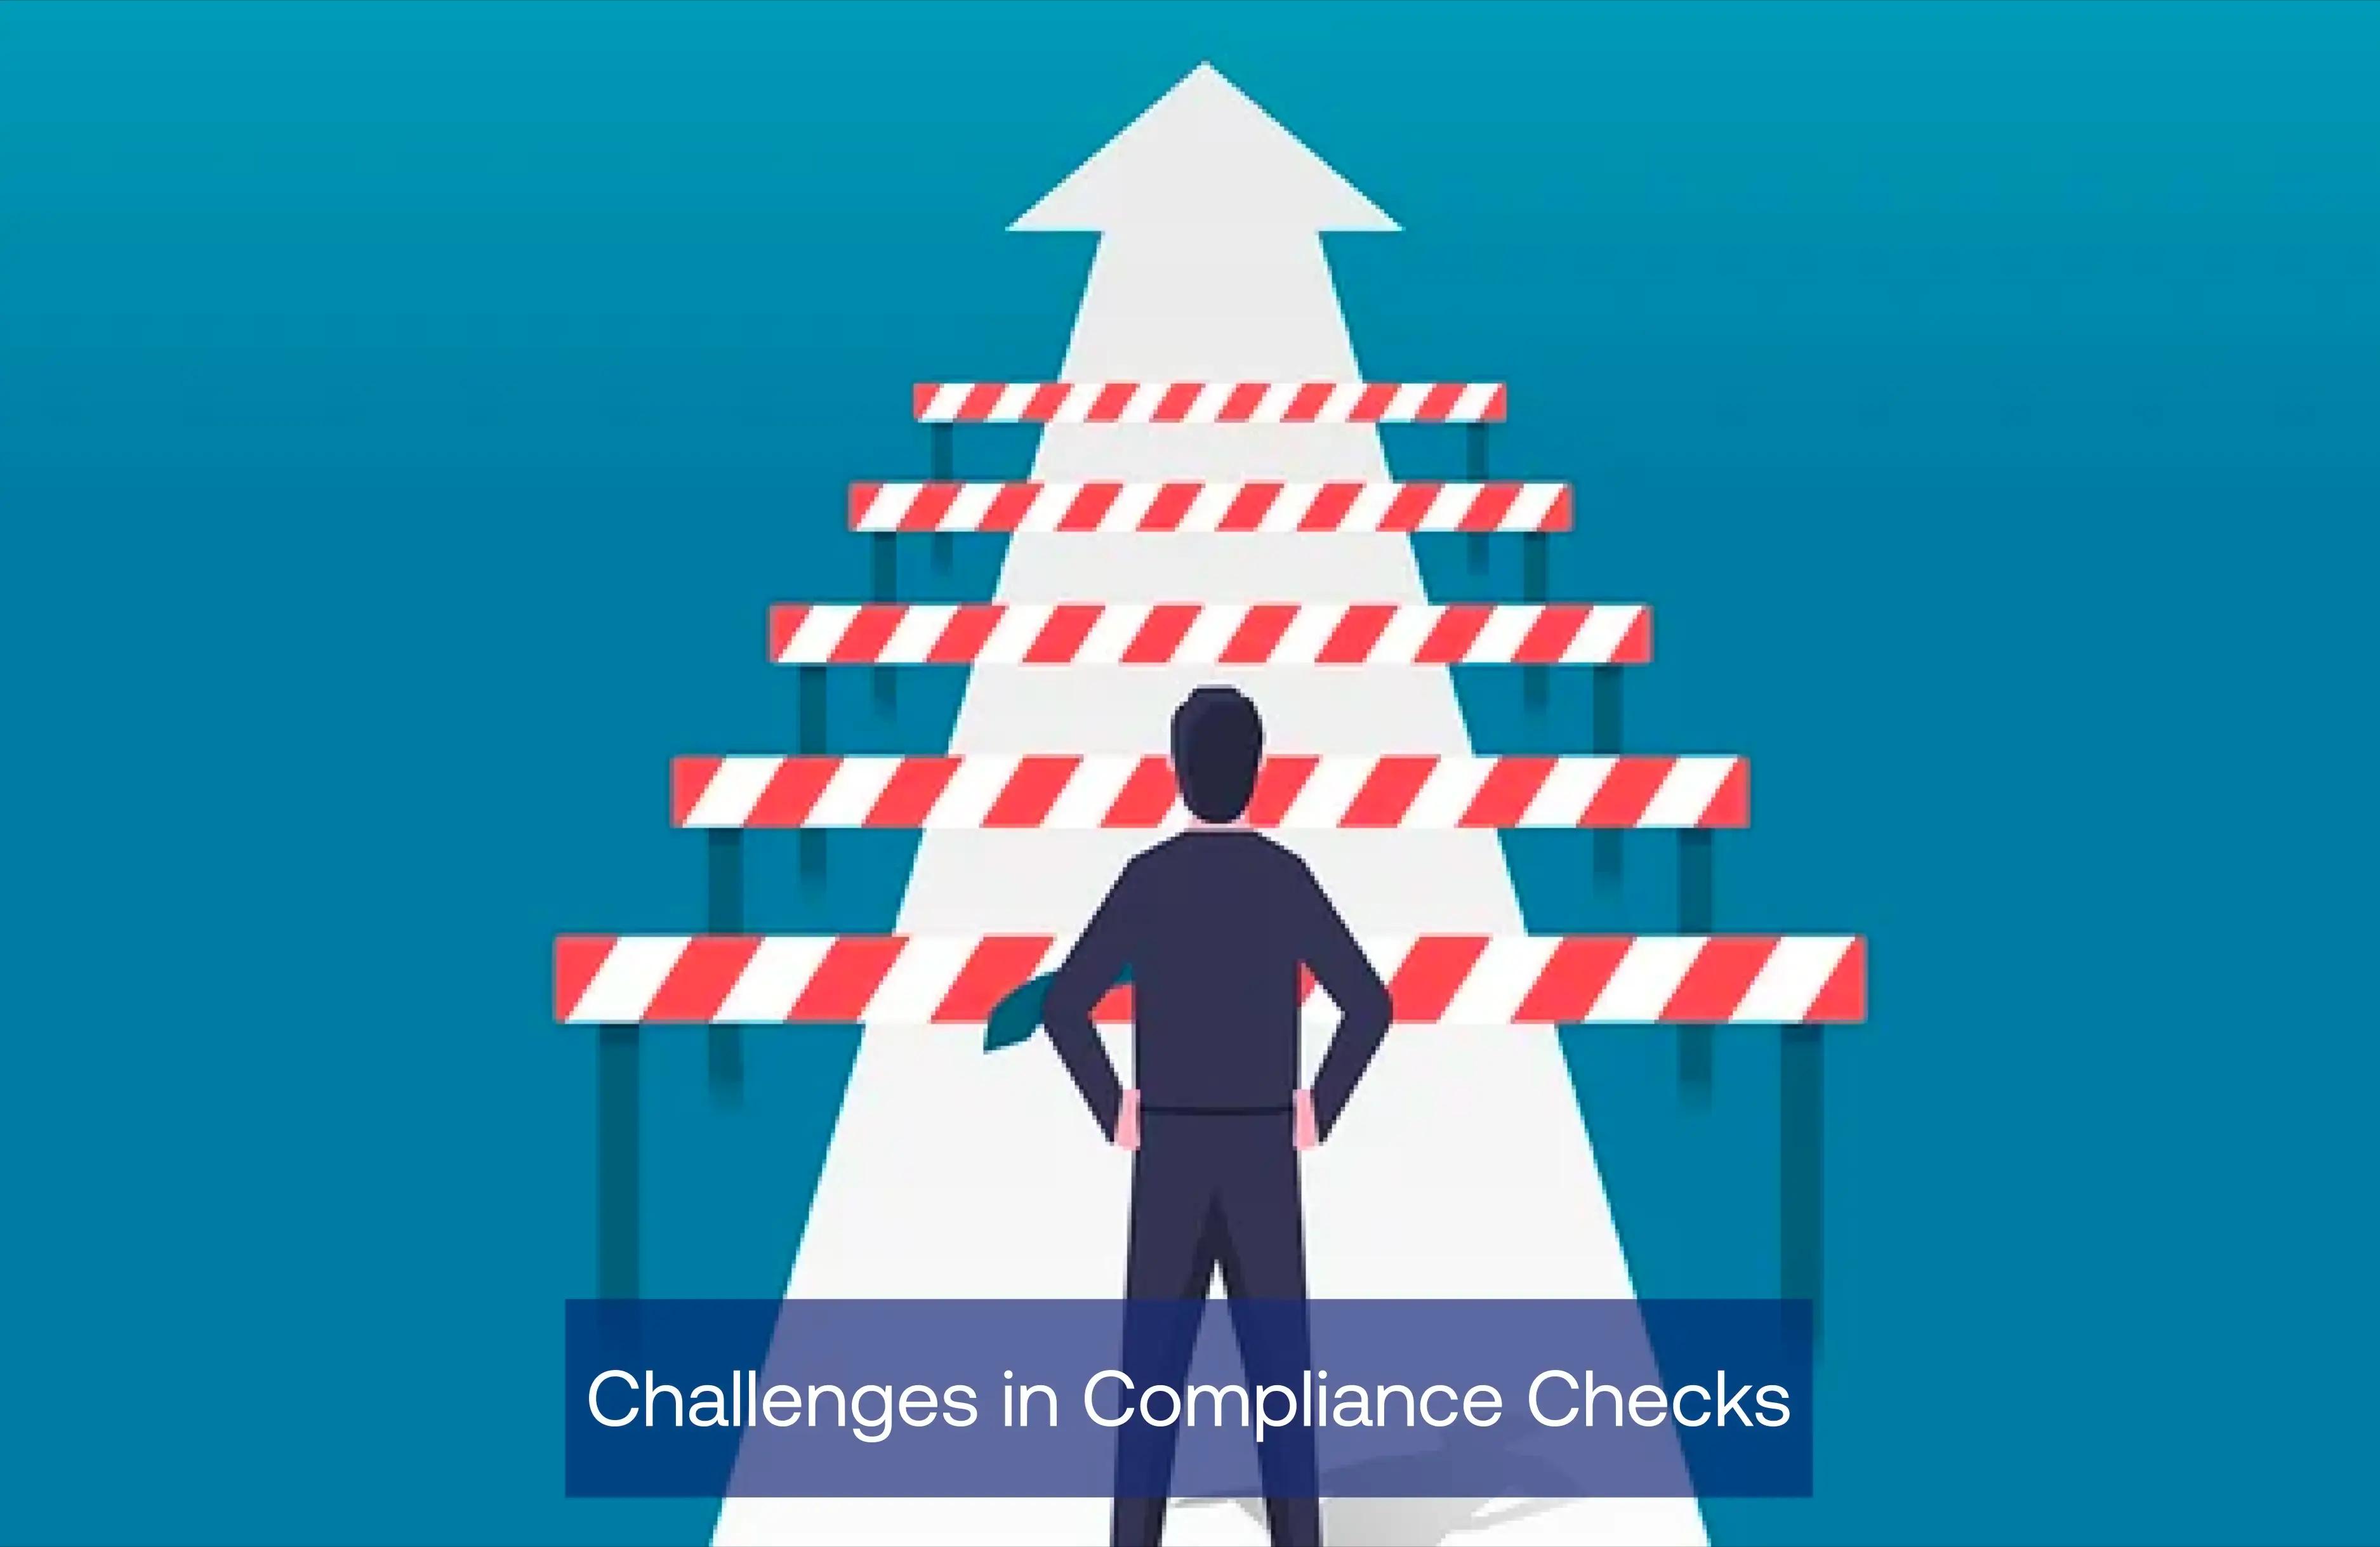 Challenges in Compilance Checks